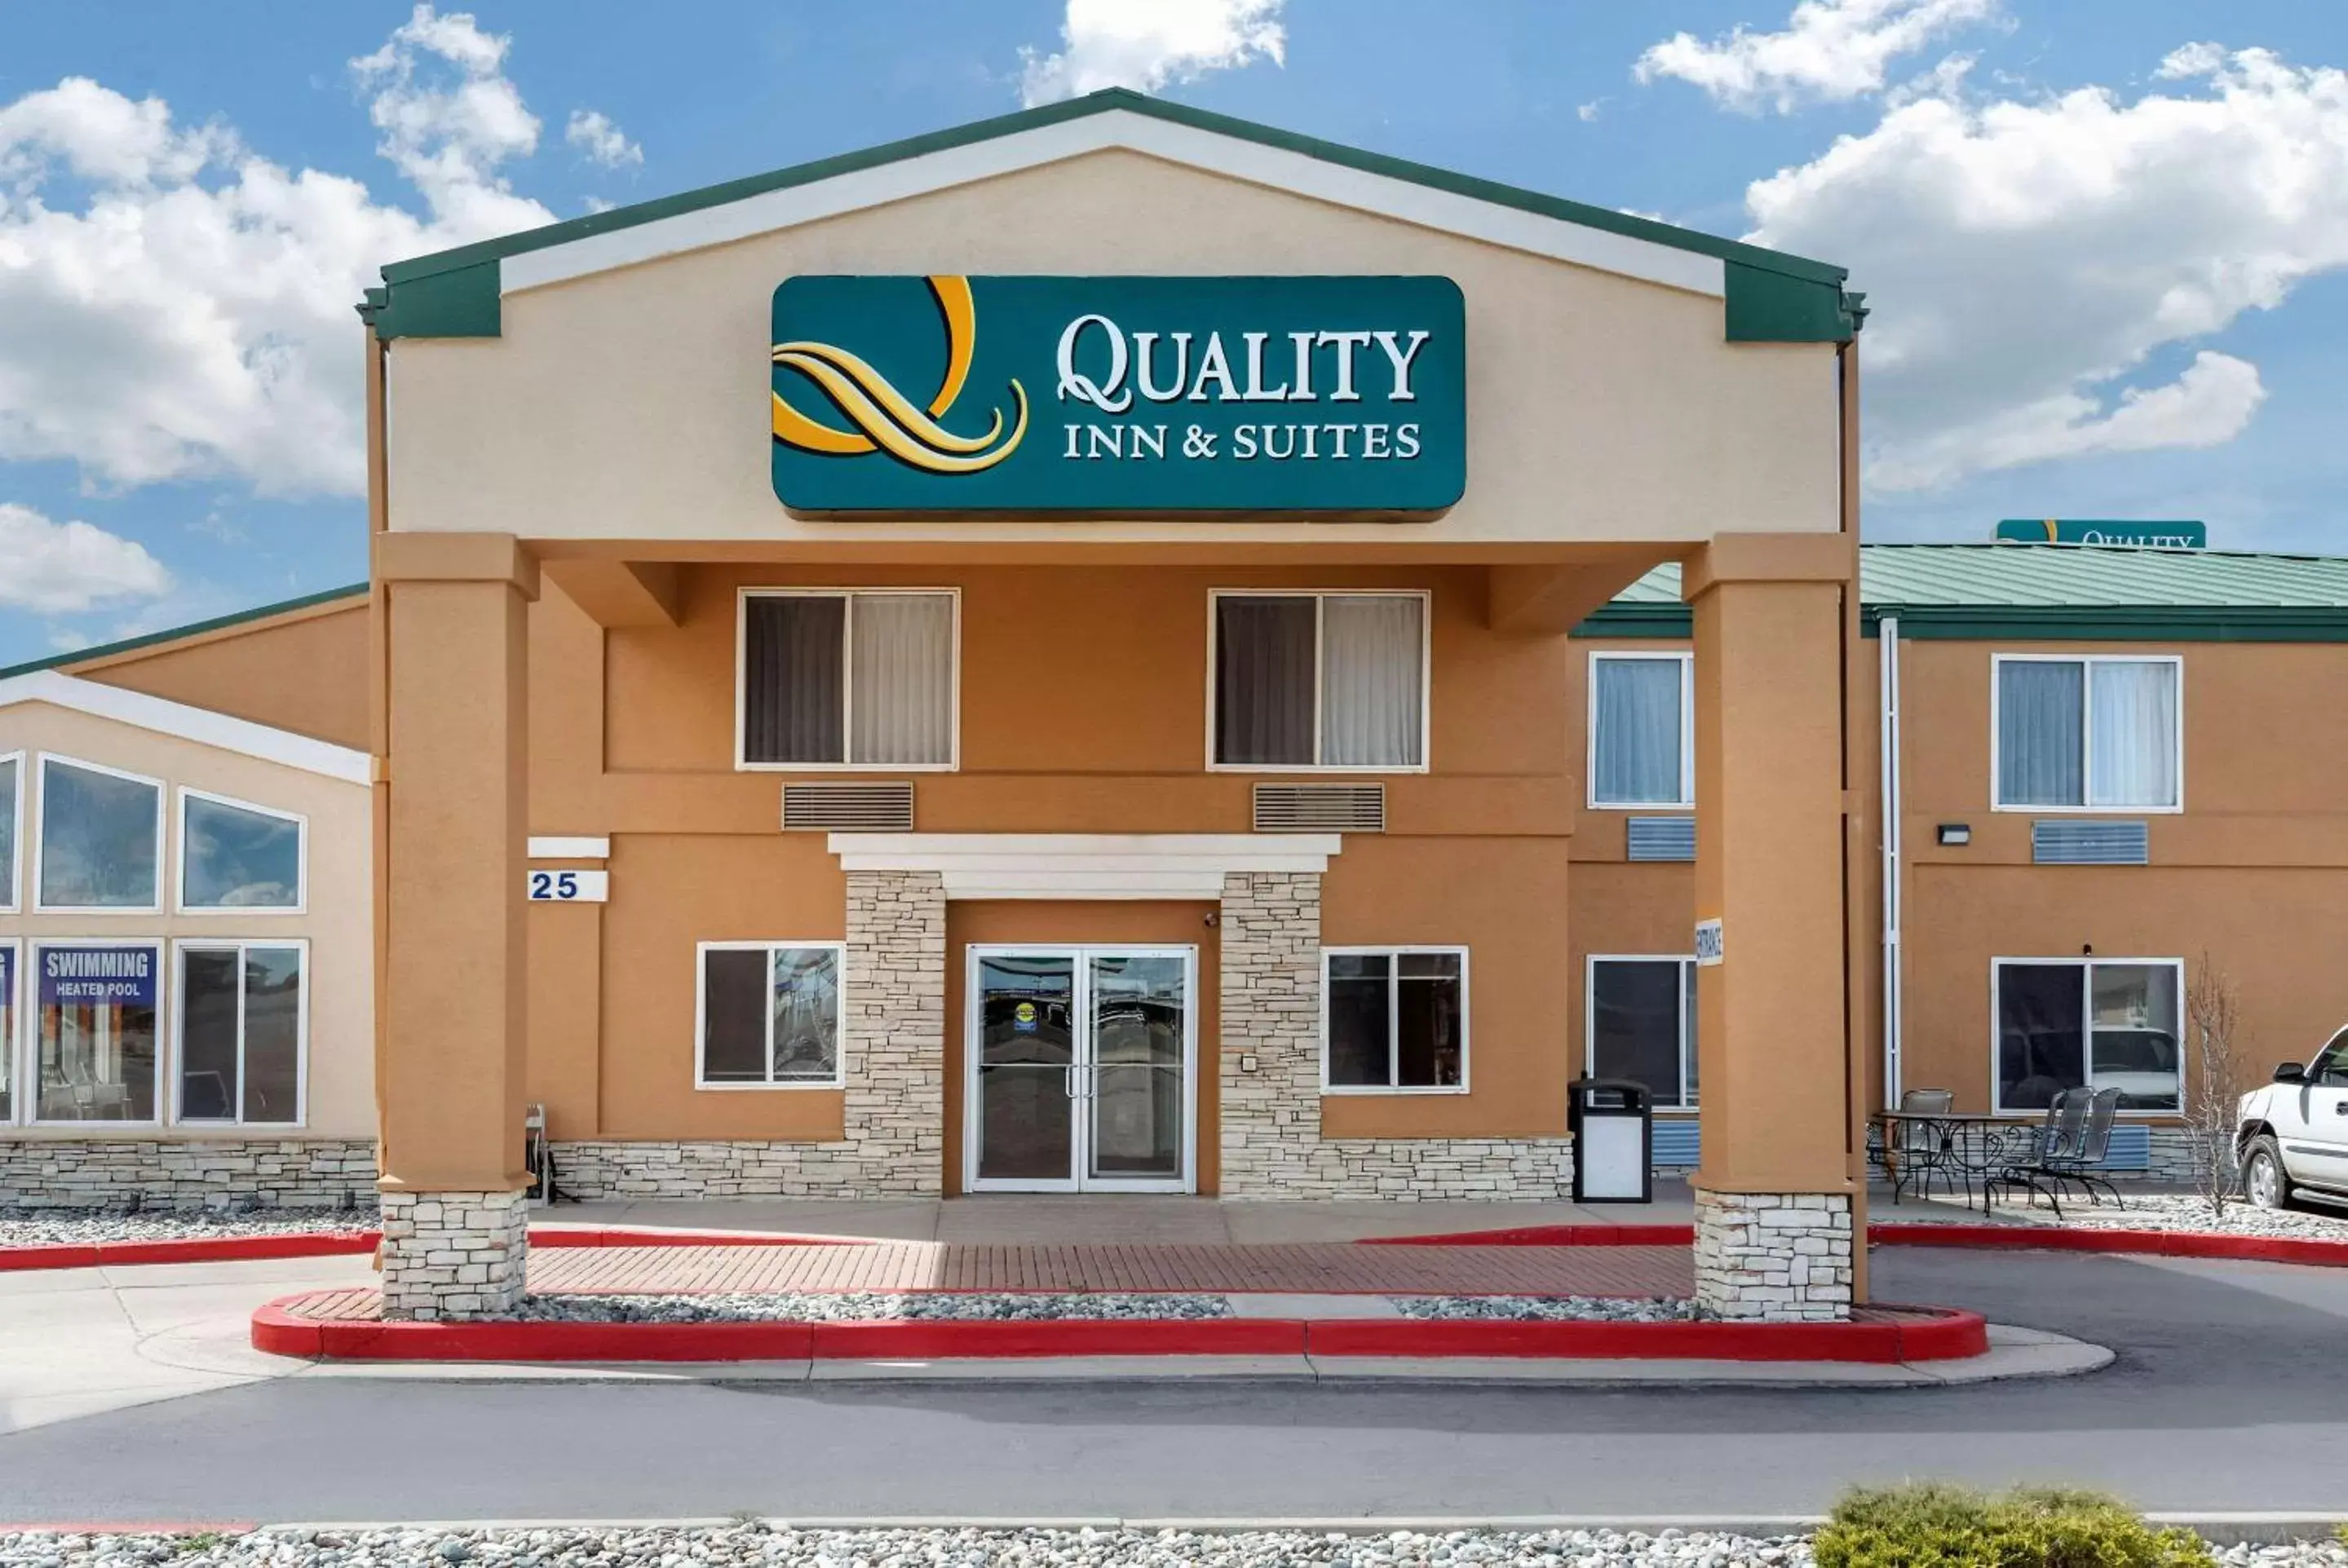 Property Building in Quality Inn & Suites Limon